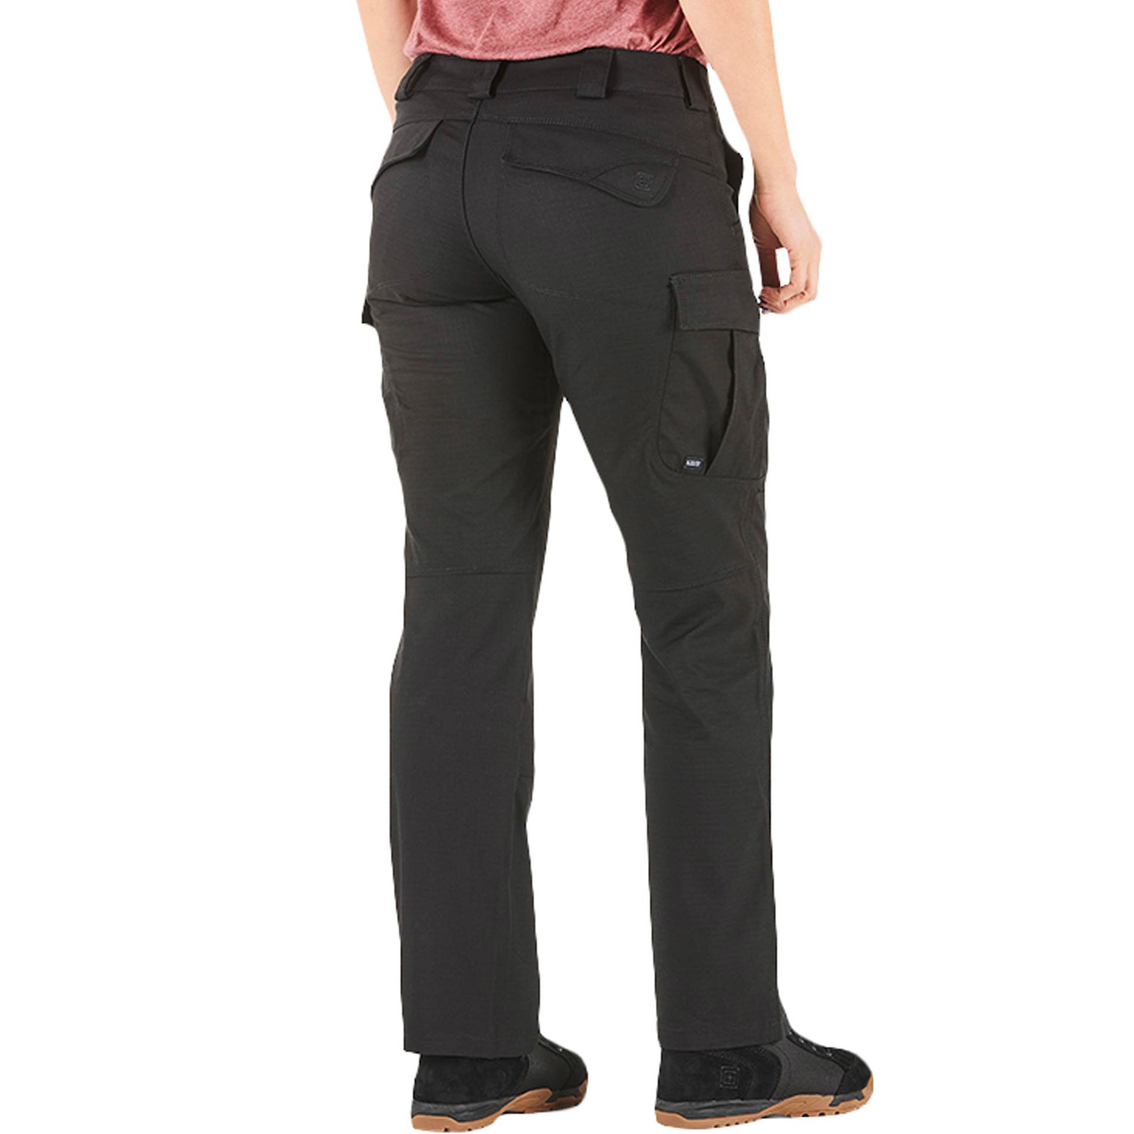 5.11 Stryke Pants | Pants | Clothing & Accessories | Shop The Exchange